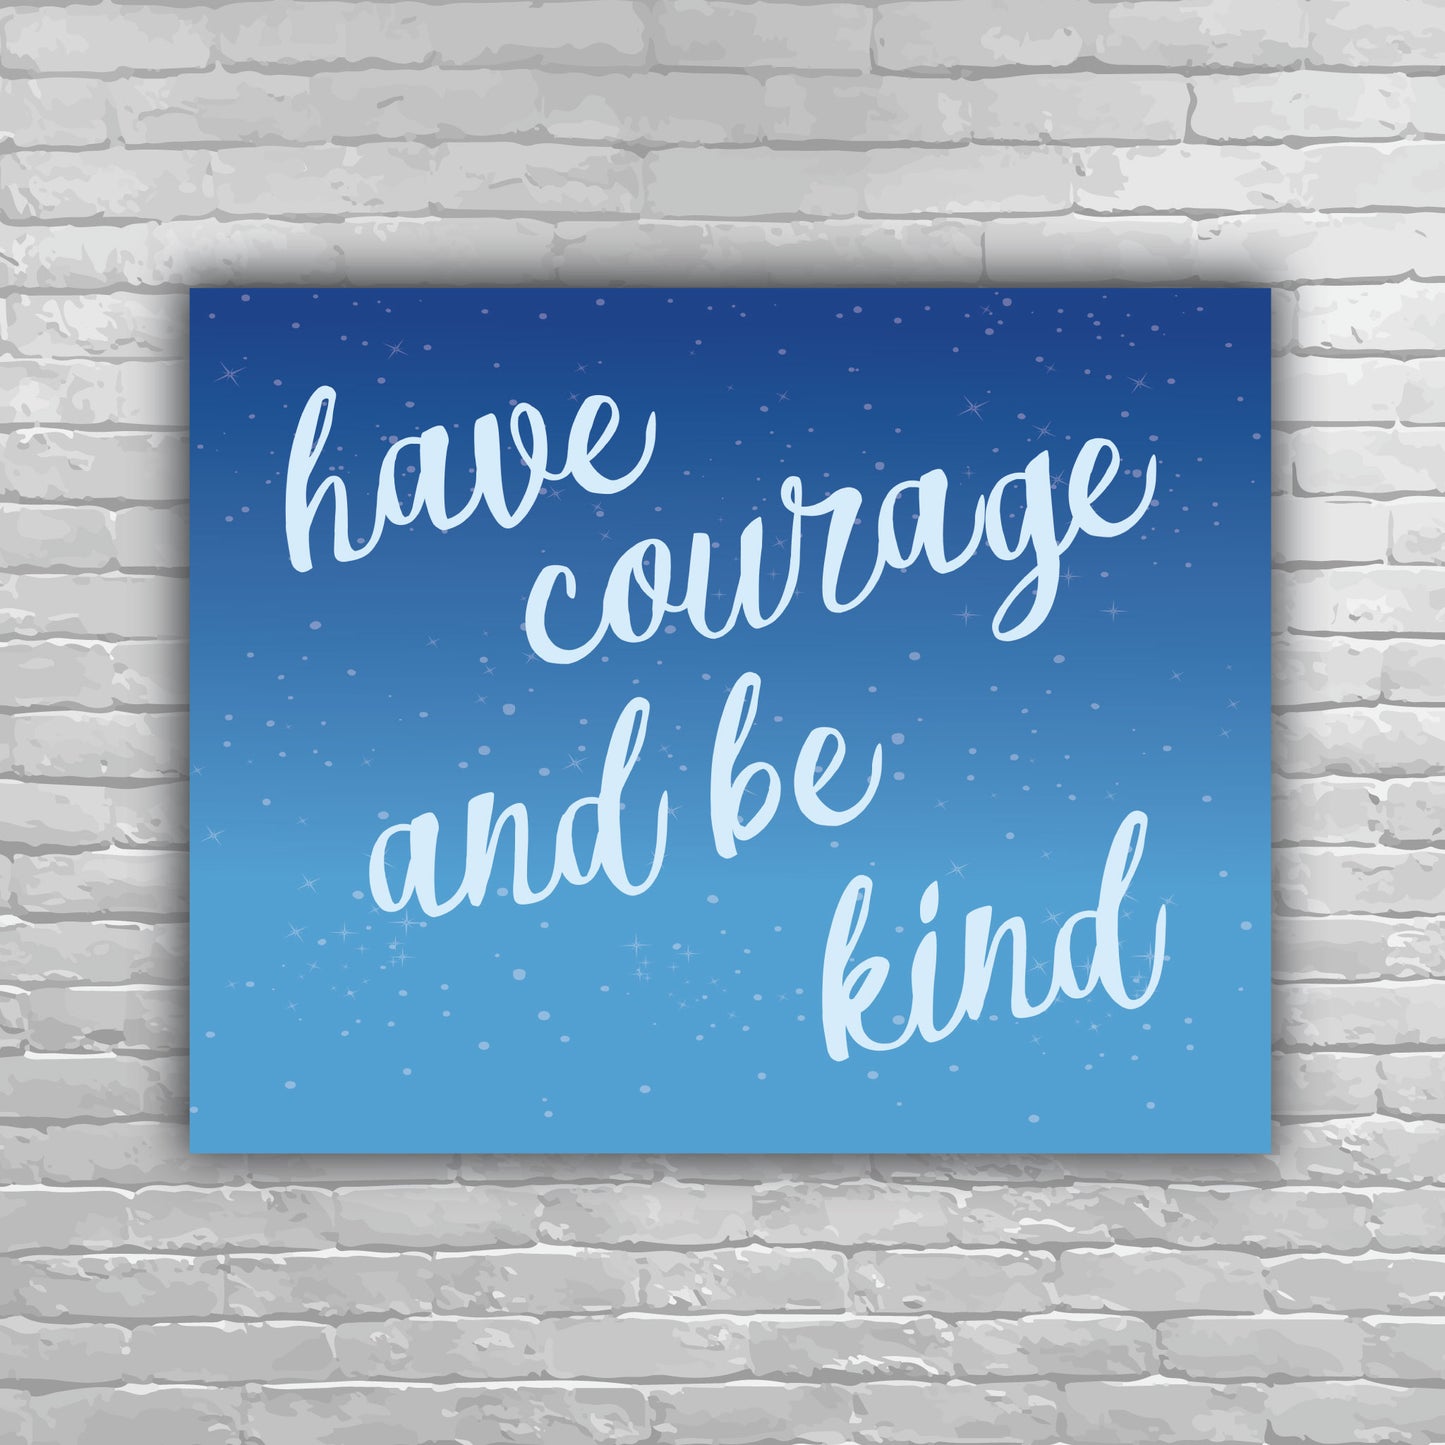 Have Courage and Be Kind, stars